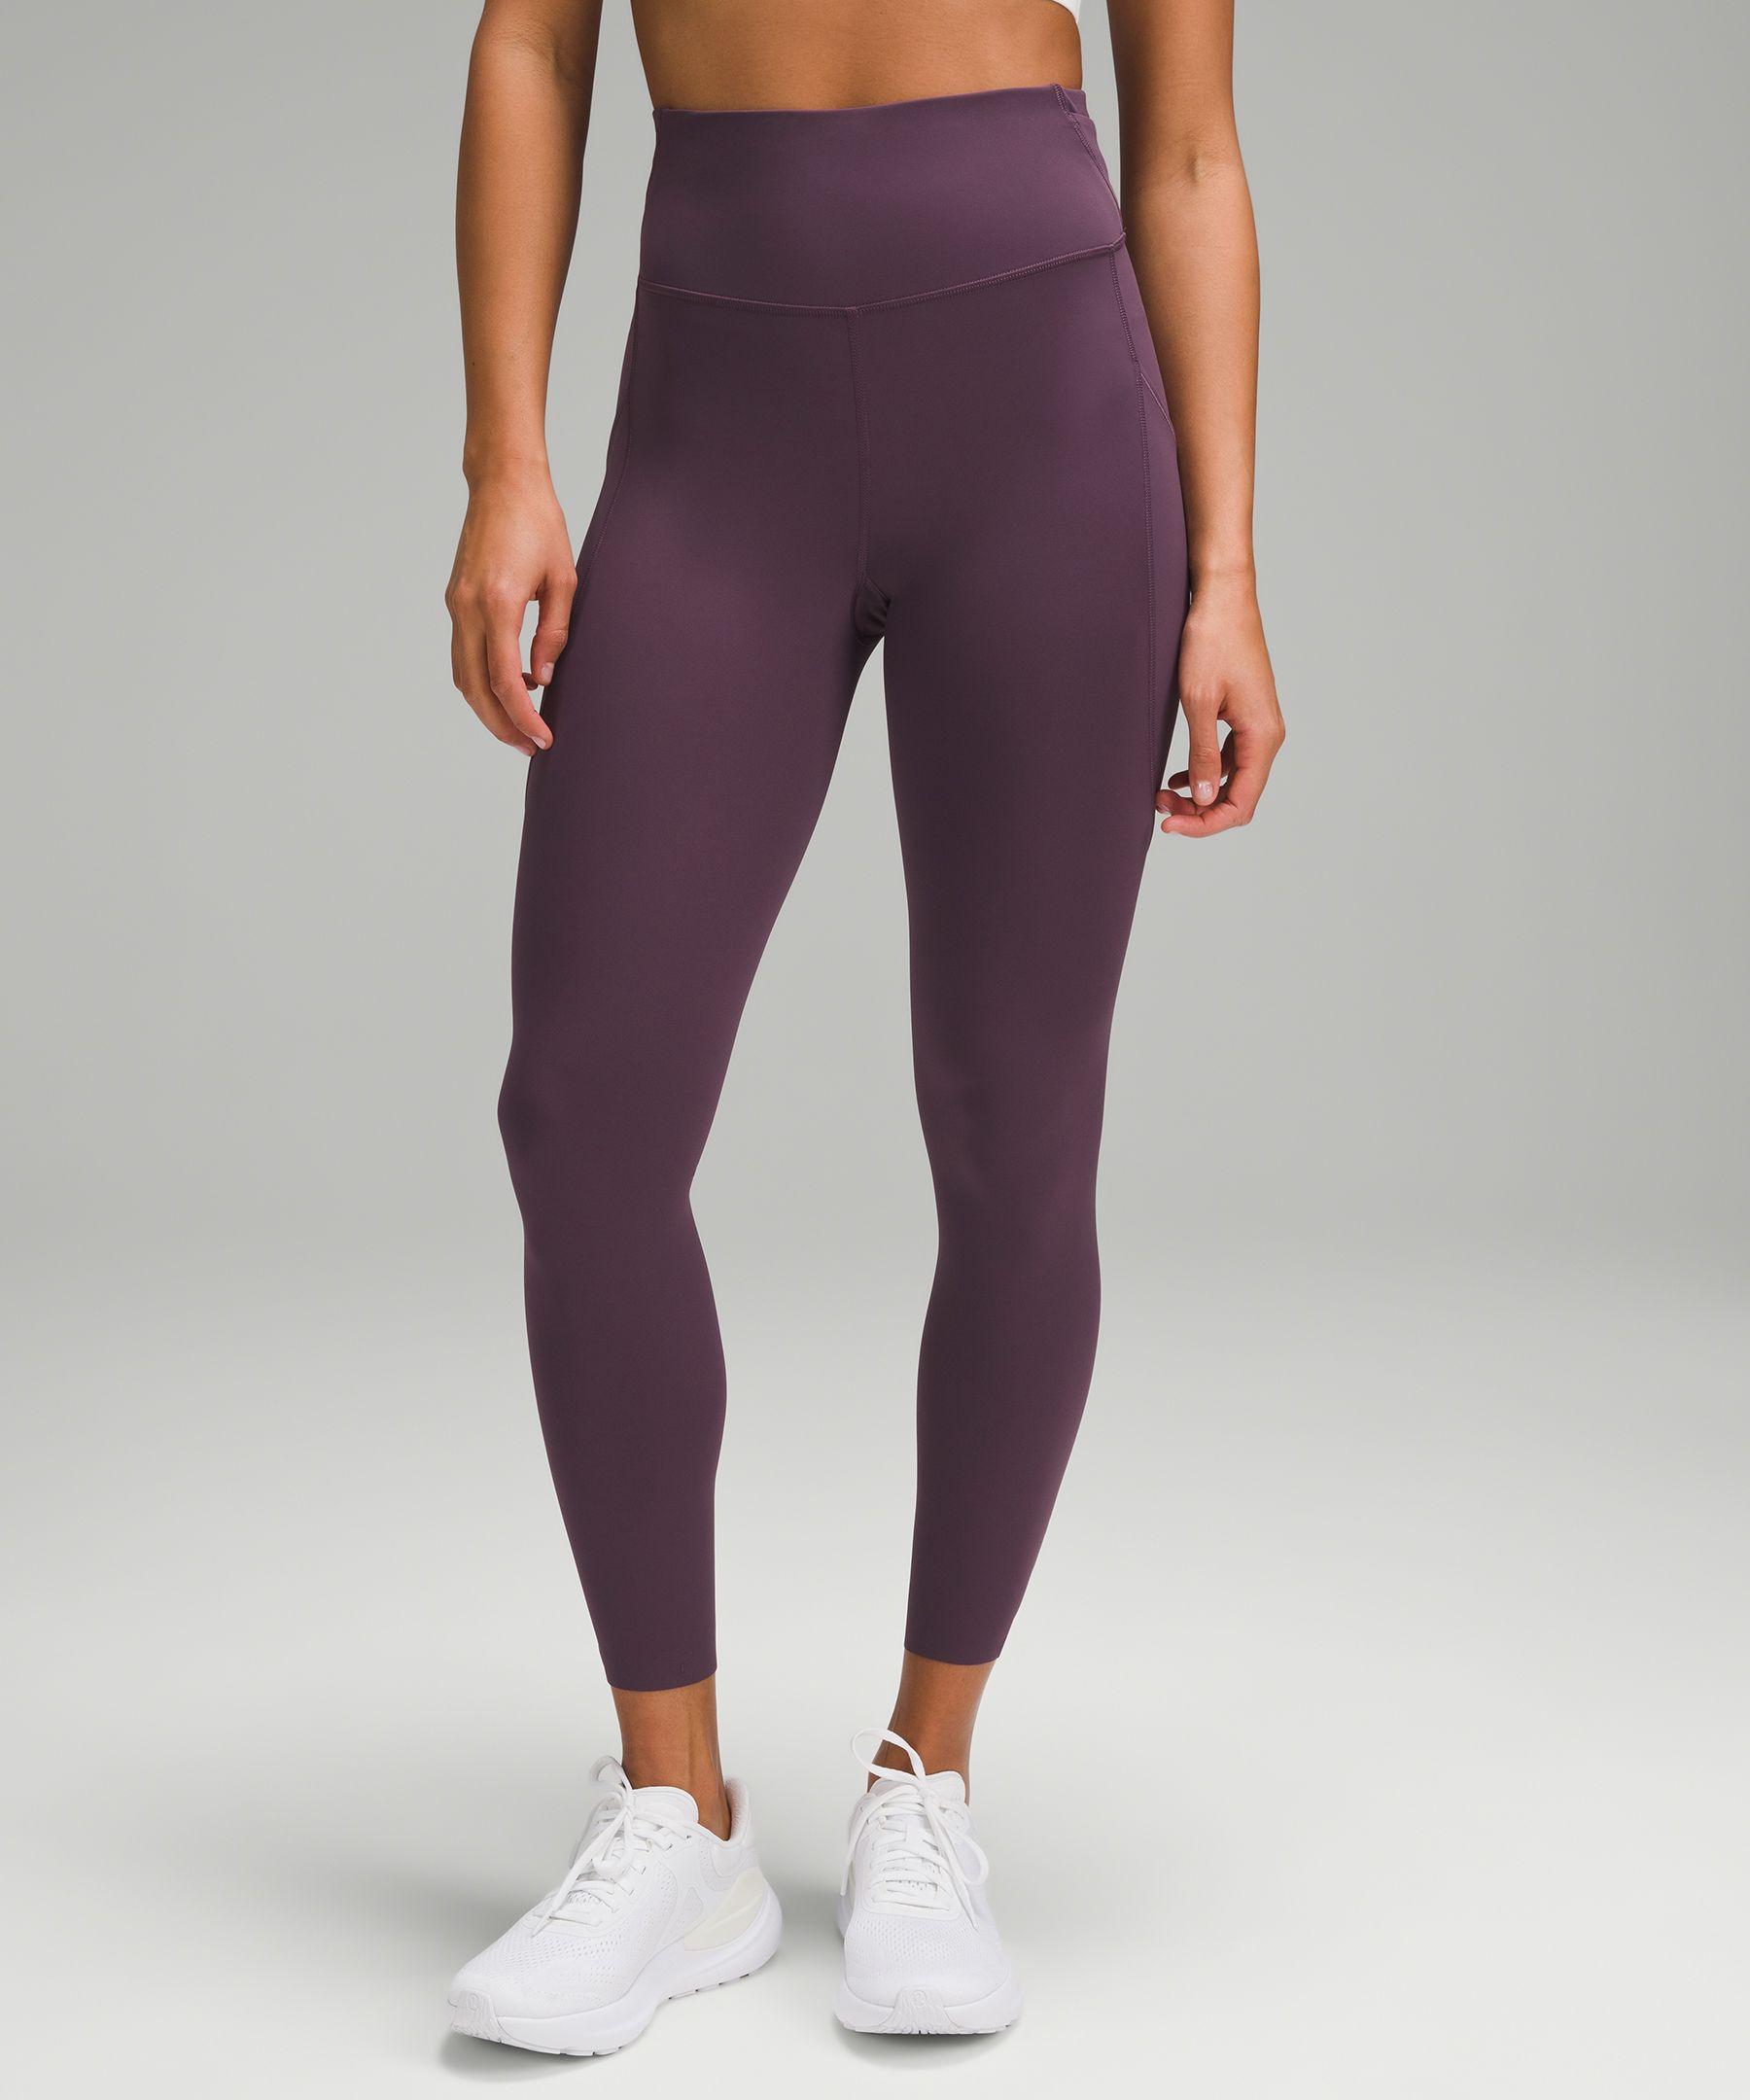 lululemon athletica Fast And Free High-rise Tight Leggings Pockets - 25 -  Color Purple - Size 10